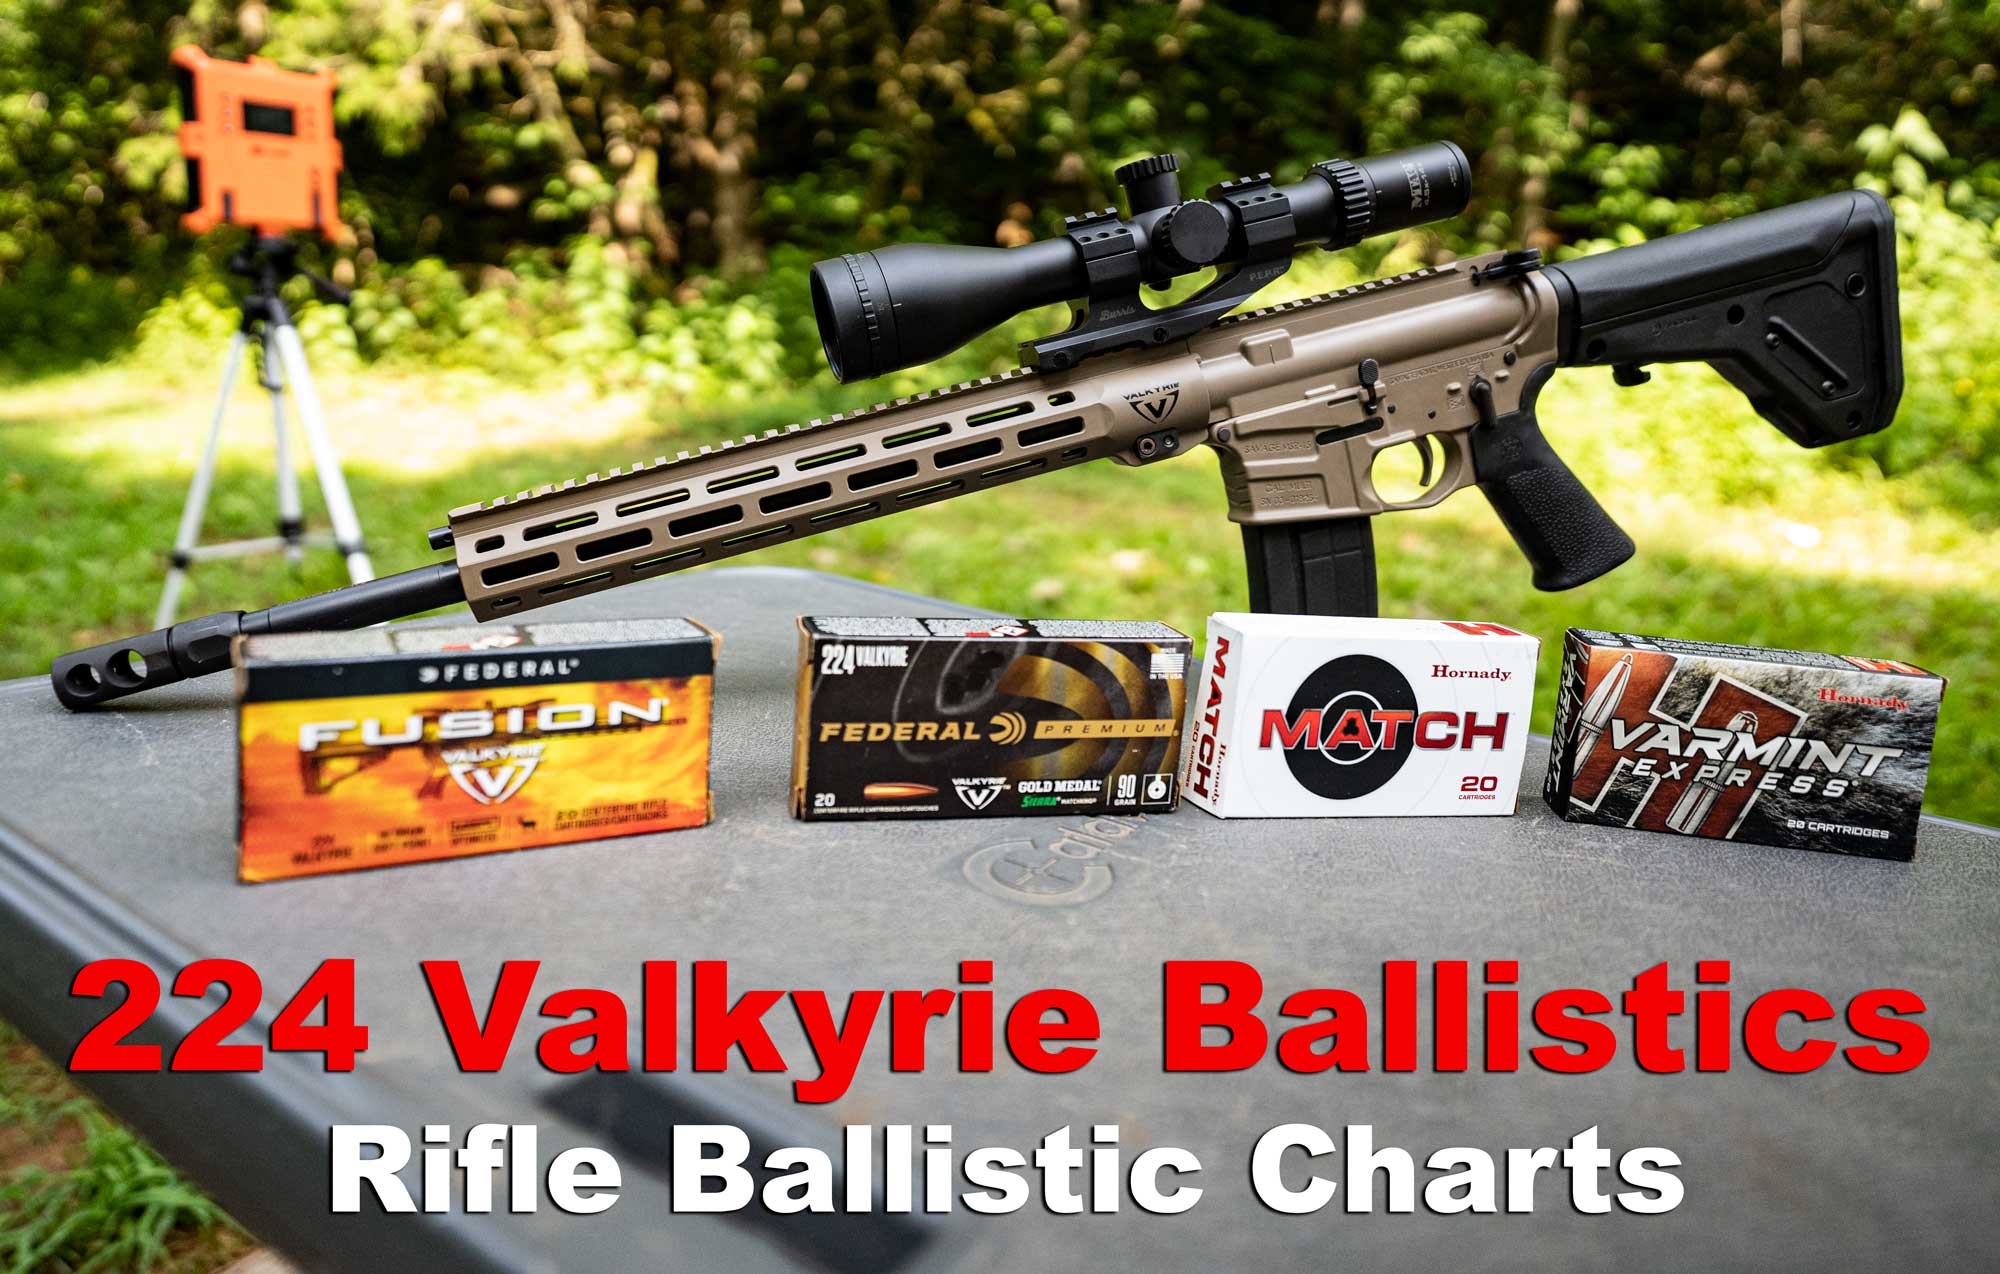 224 valkyrie ballistics with rifle and ammo at the range